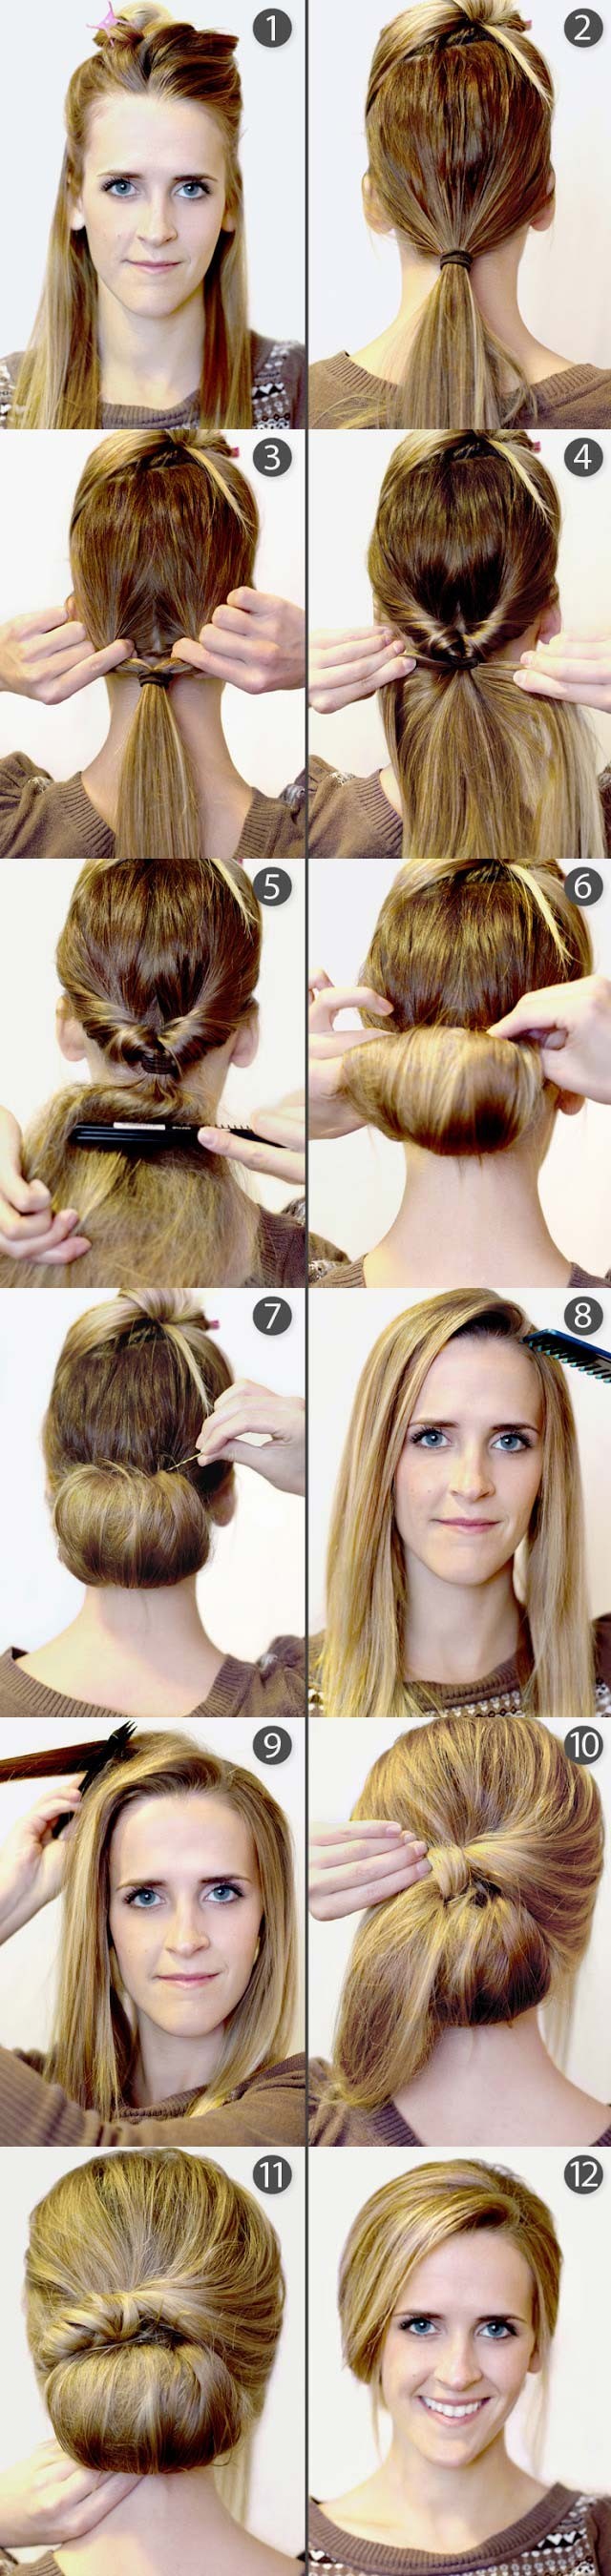 19 Pretty Long Hairstyles with Tutorials - Pretty Designs